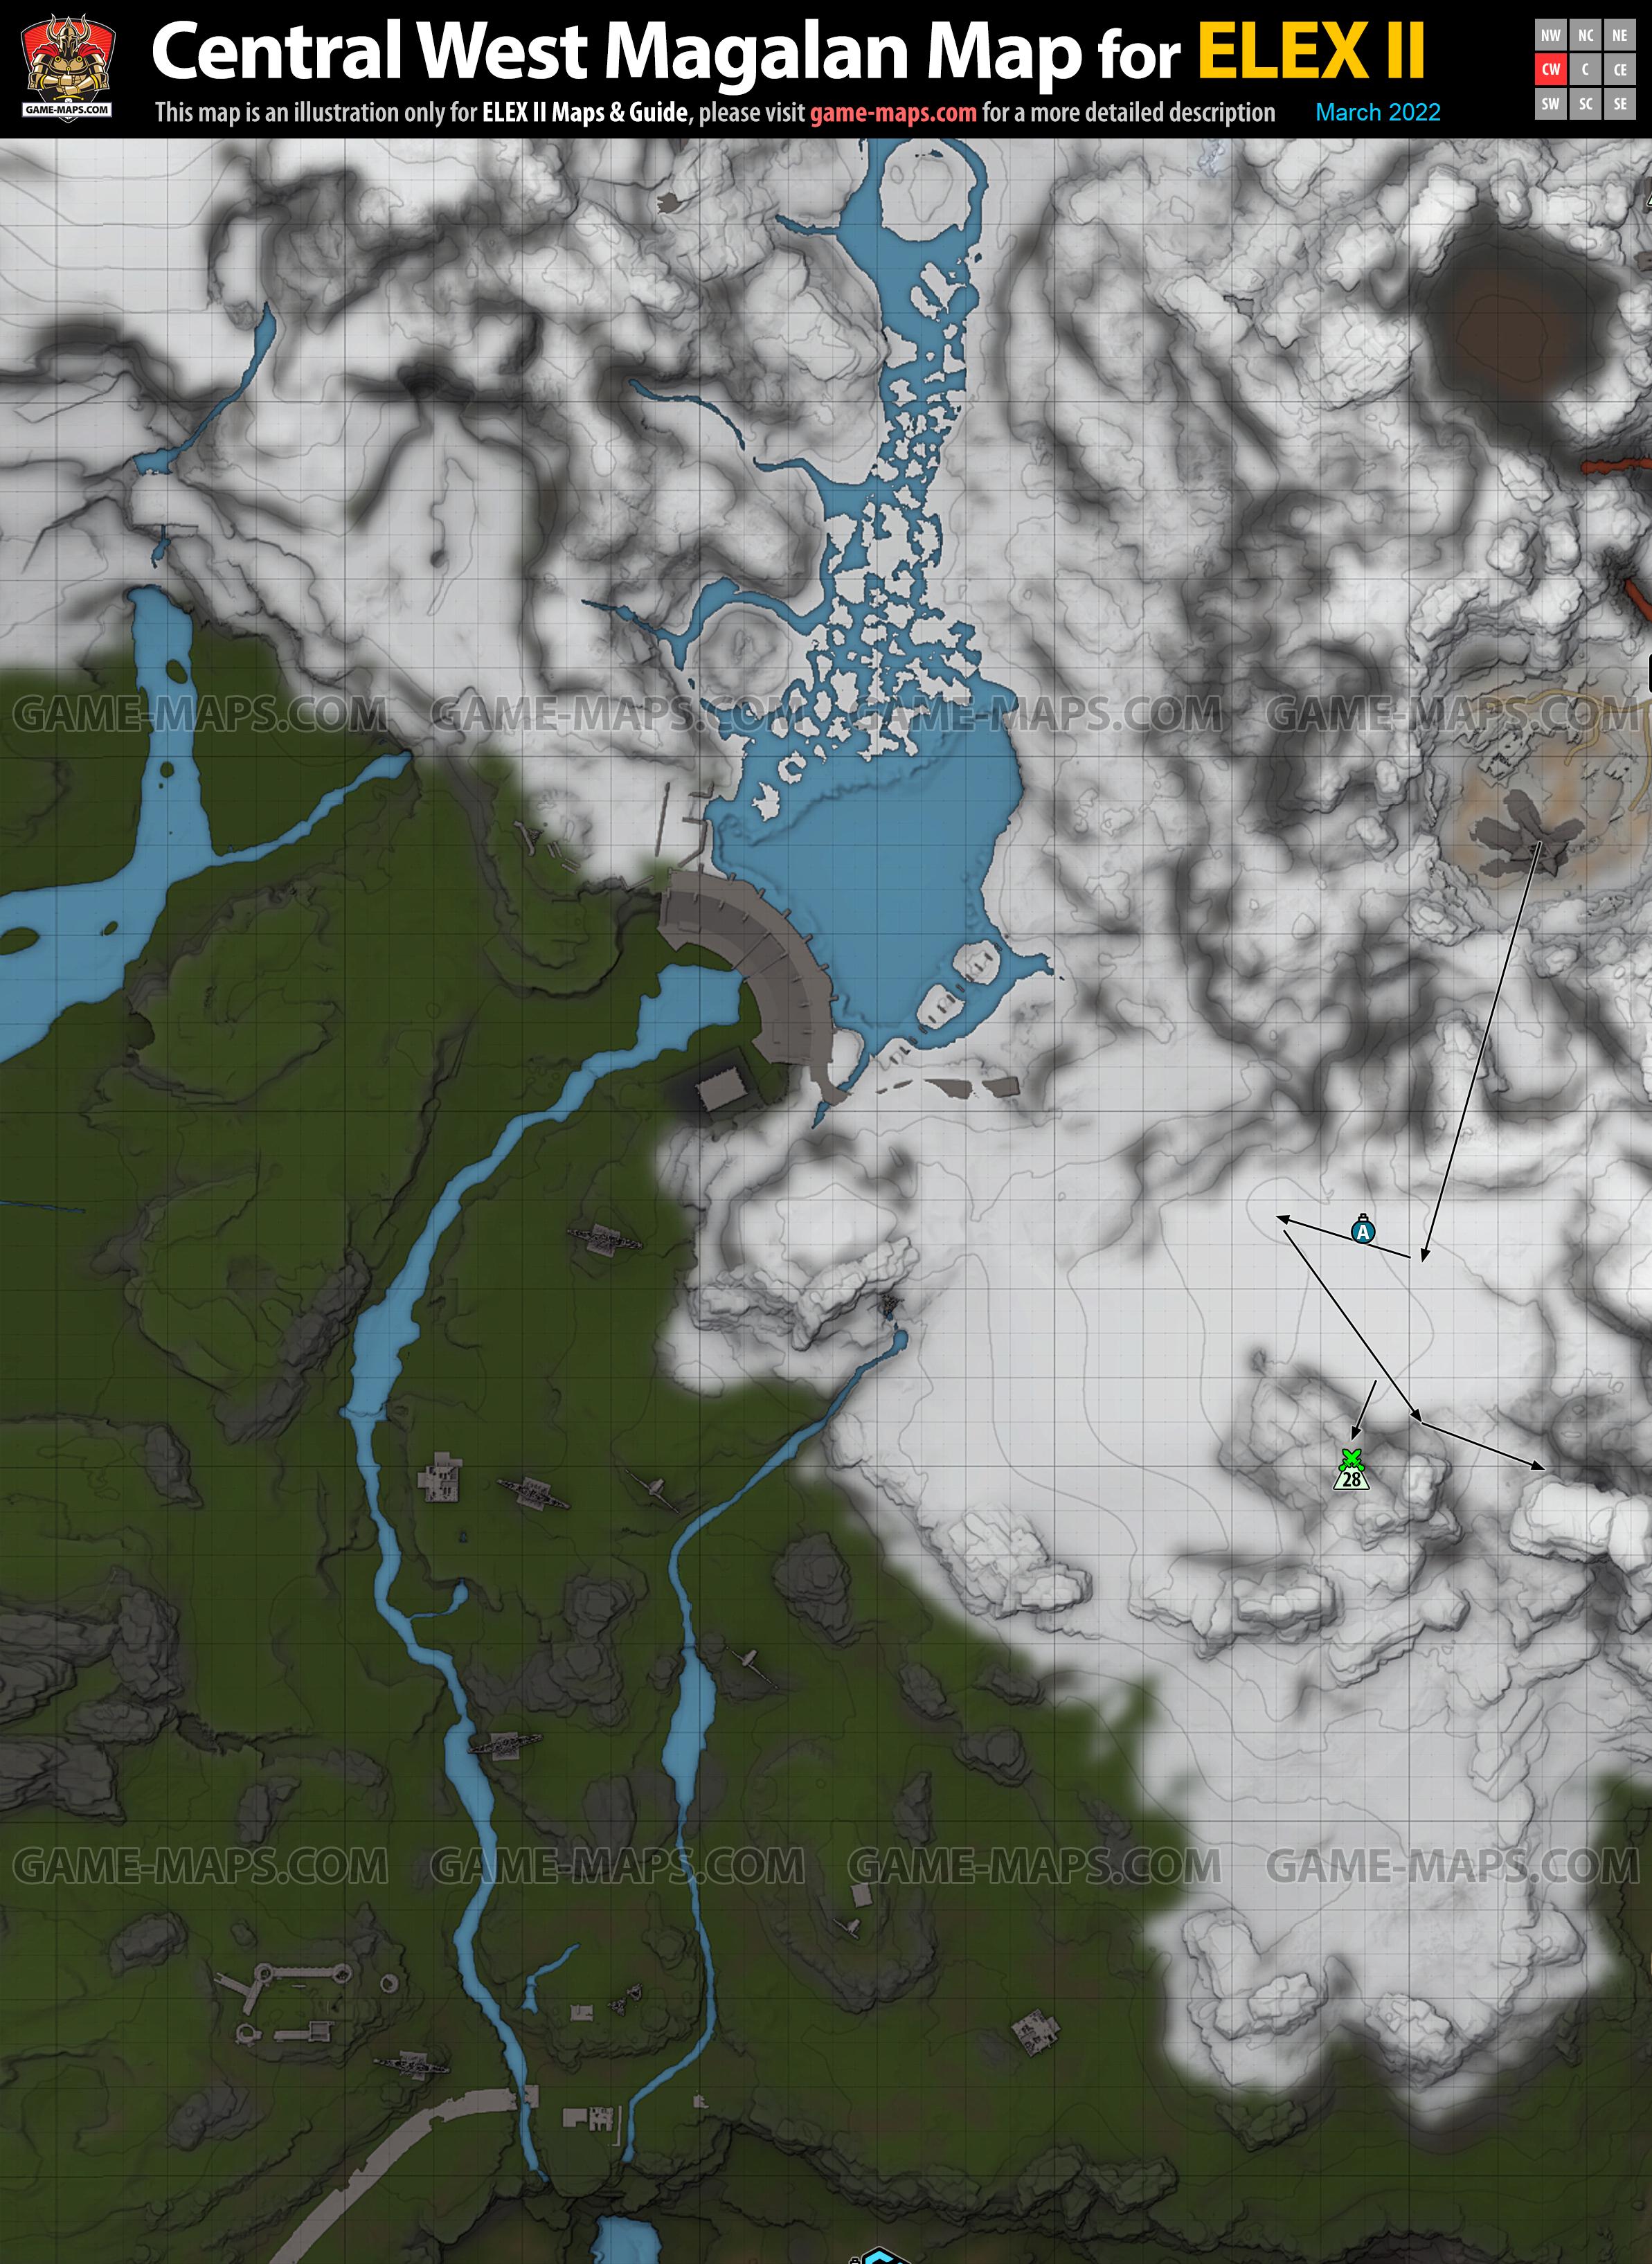 Central West Magalan Map for ELEX II